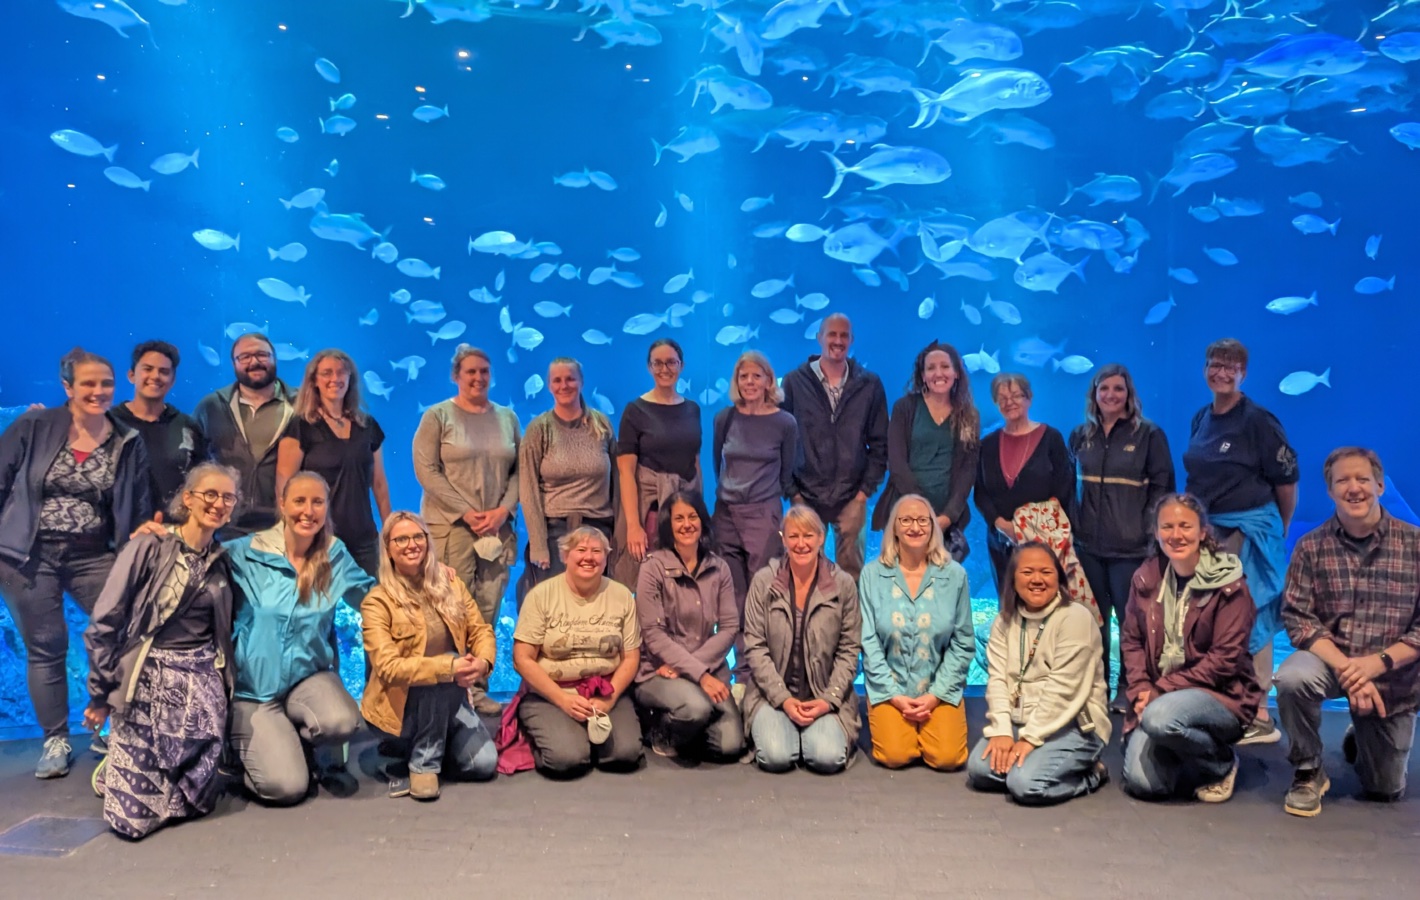 Group photo in front of an aquarium.